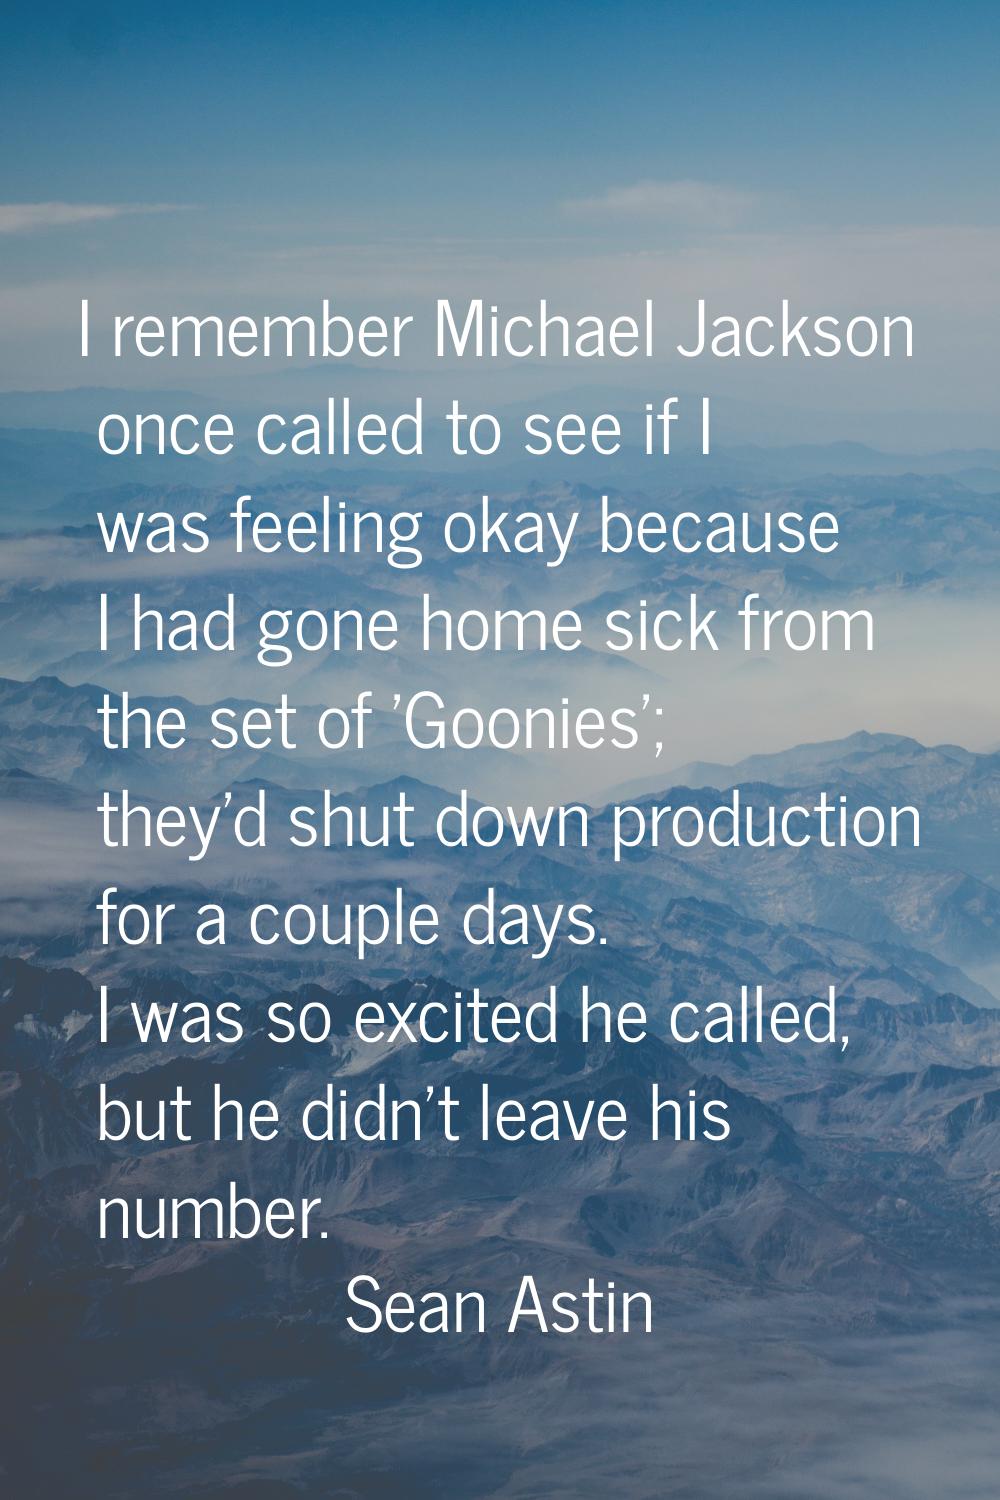 I remember Michael Jackson once called to see if I was feeling okay because I had gone home sick fr